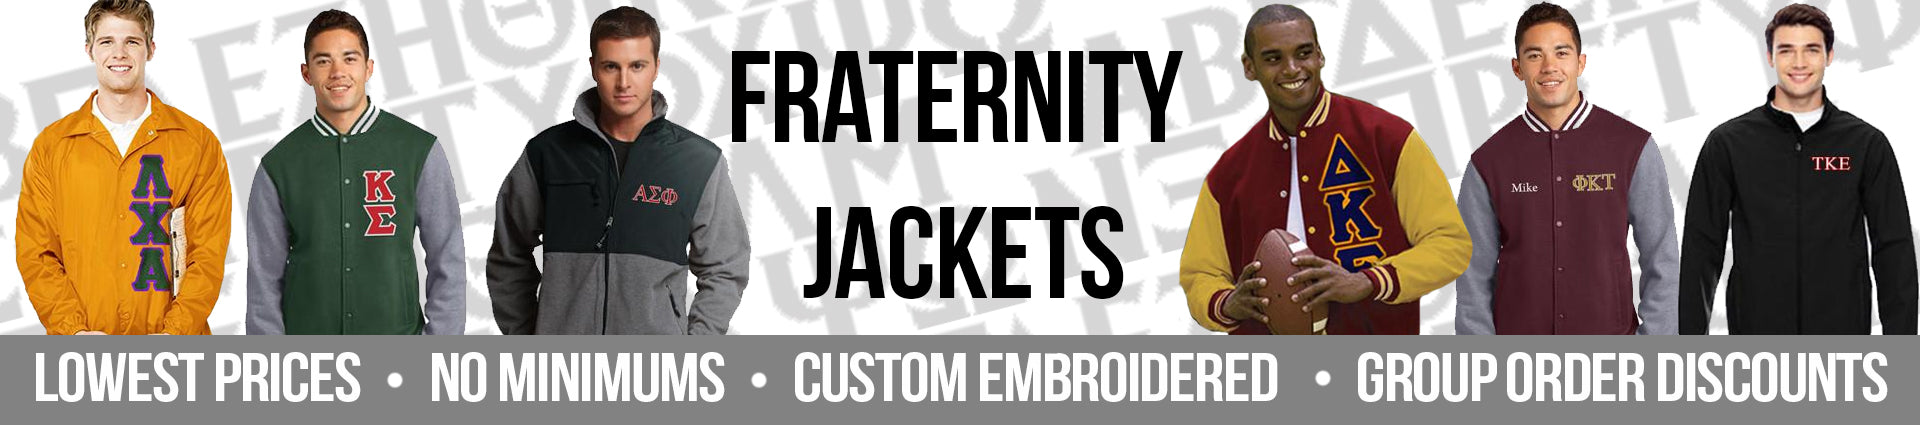 Fraternity jackets. Lowest prices, no minimums. Custom embroidered. Group order discounts.